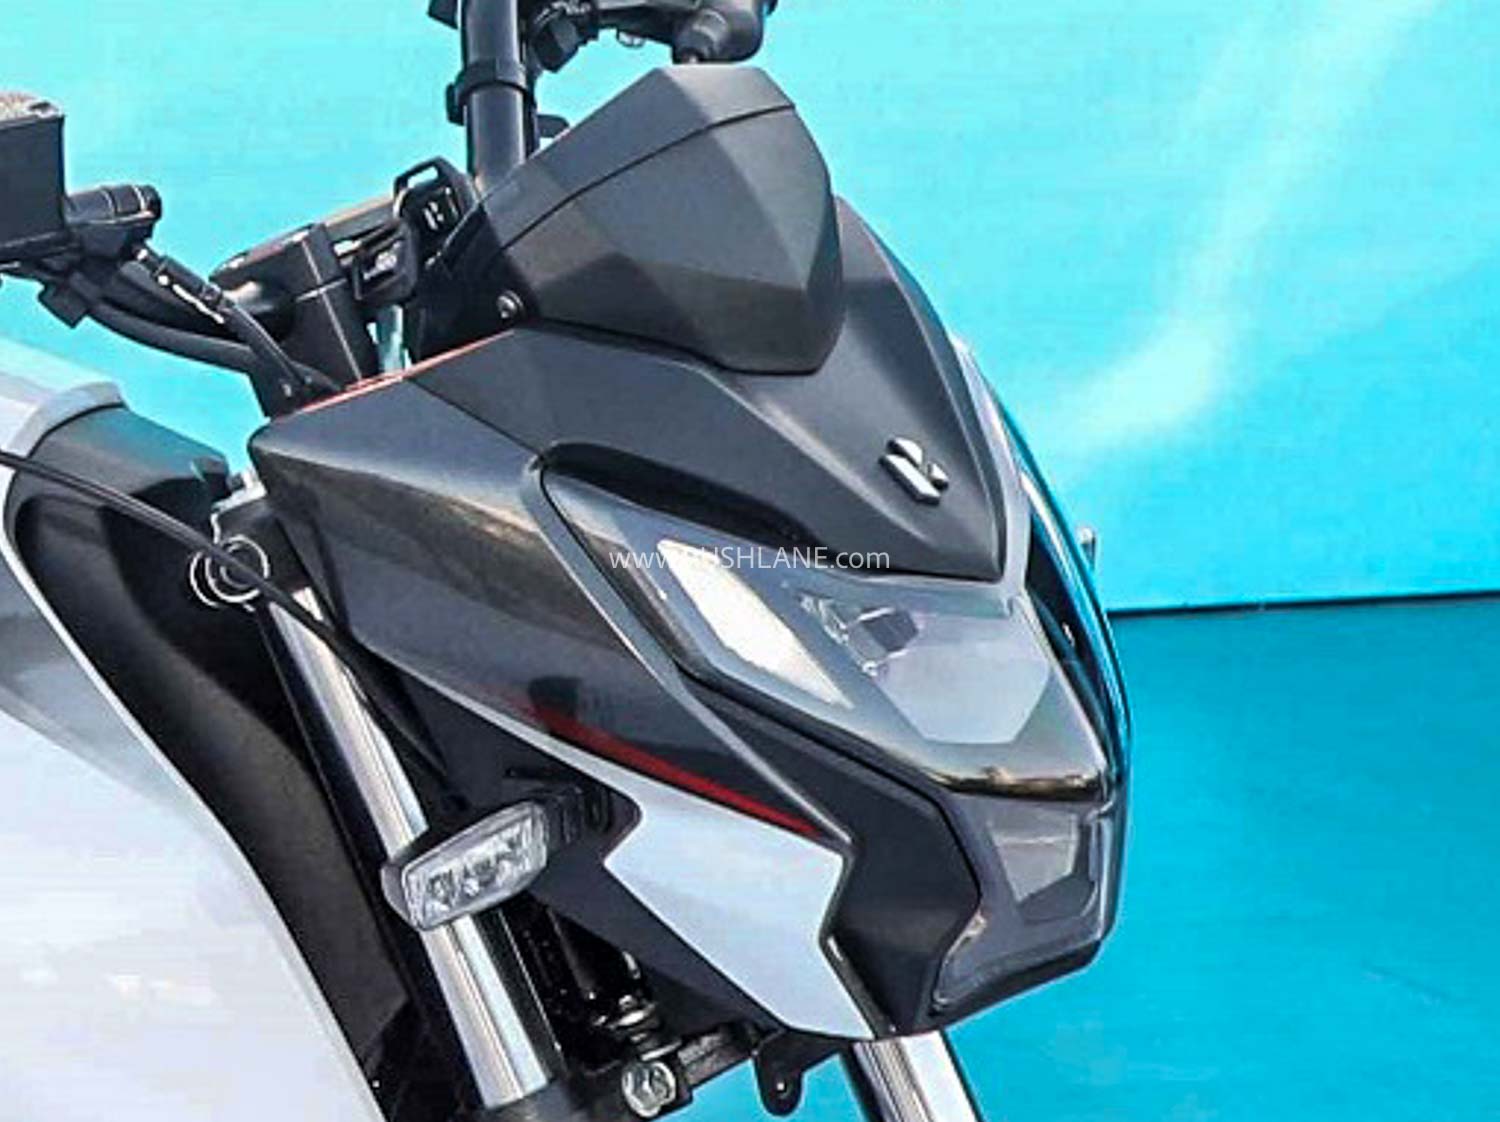 Hero Xtreme 160r Debuts As Urban Race 0 To 60 Kmph In 4 7s